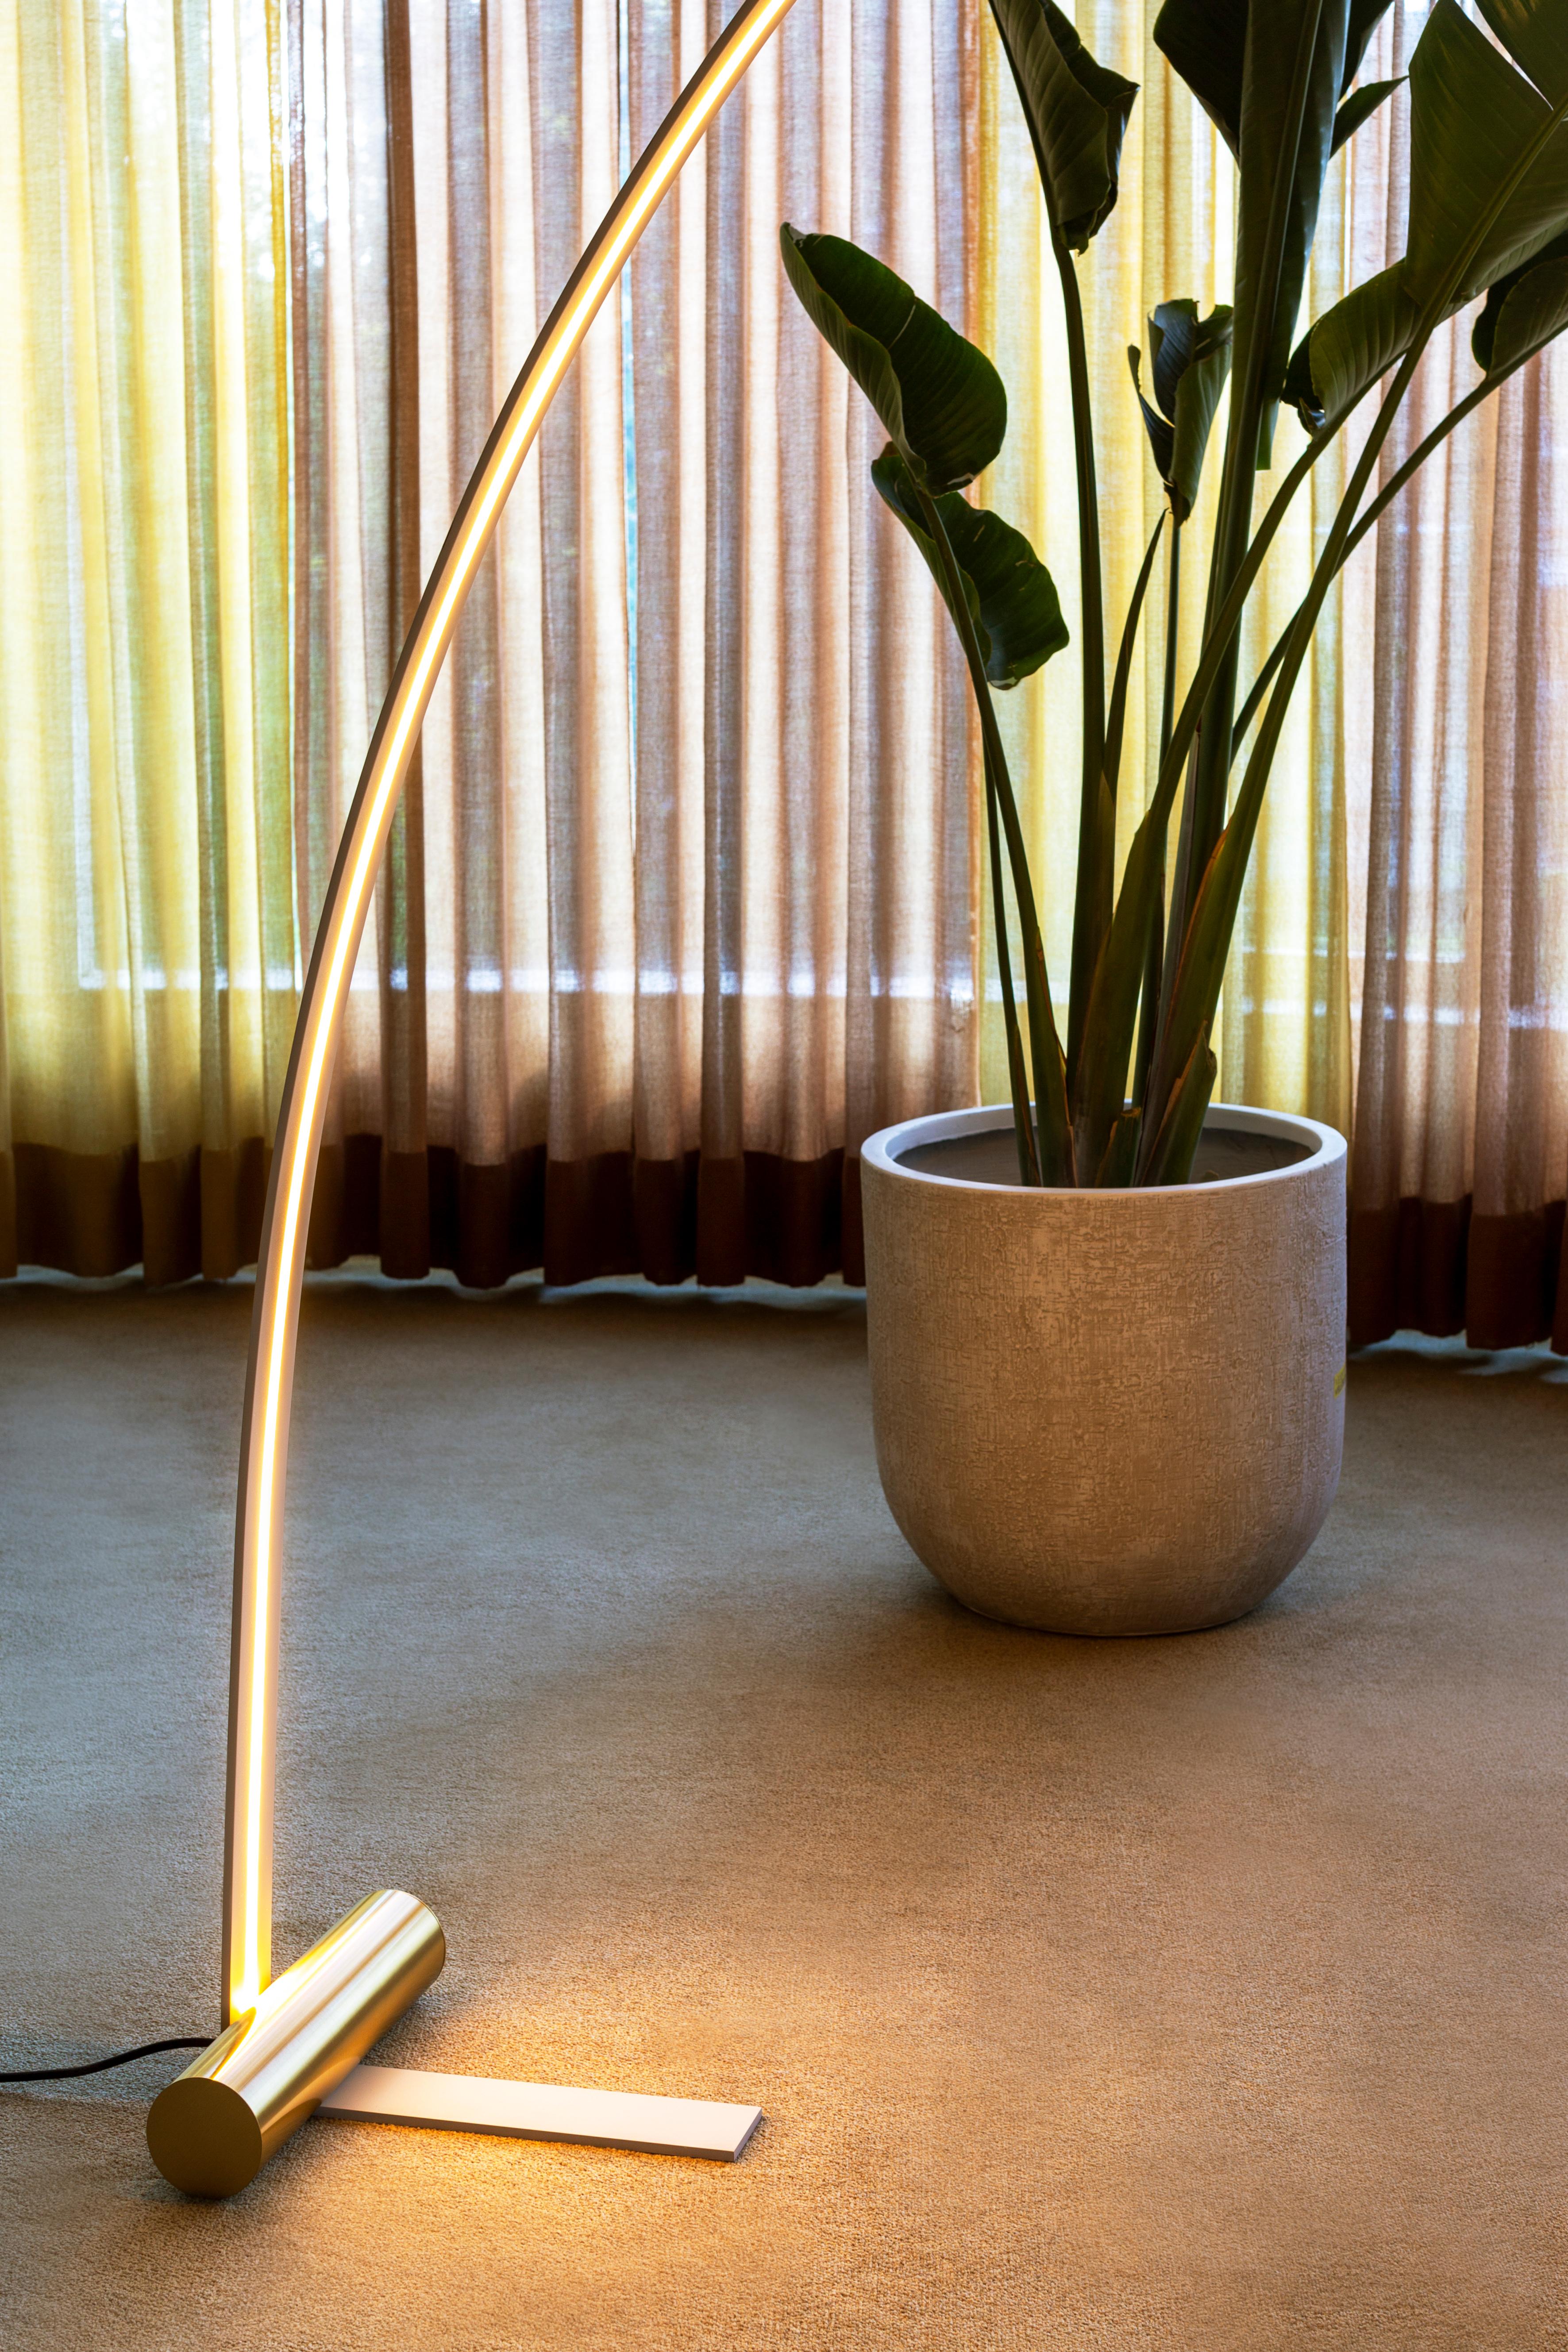 Modern Floor Lamp 'Nastro 563.64' by Studiopepe x Tooy, Beige & Brushed Brass In New Condition For Sale In Paris, FR